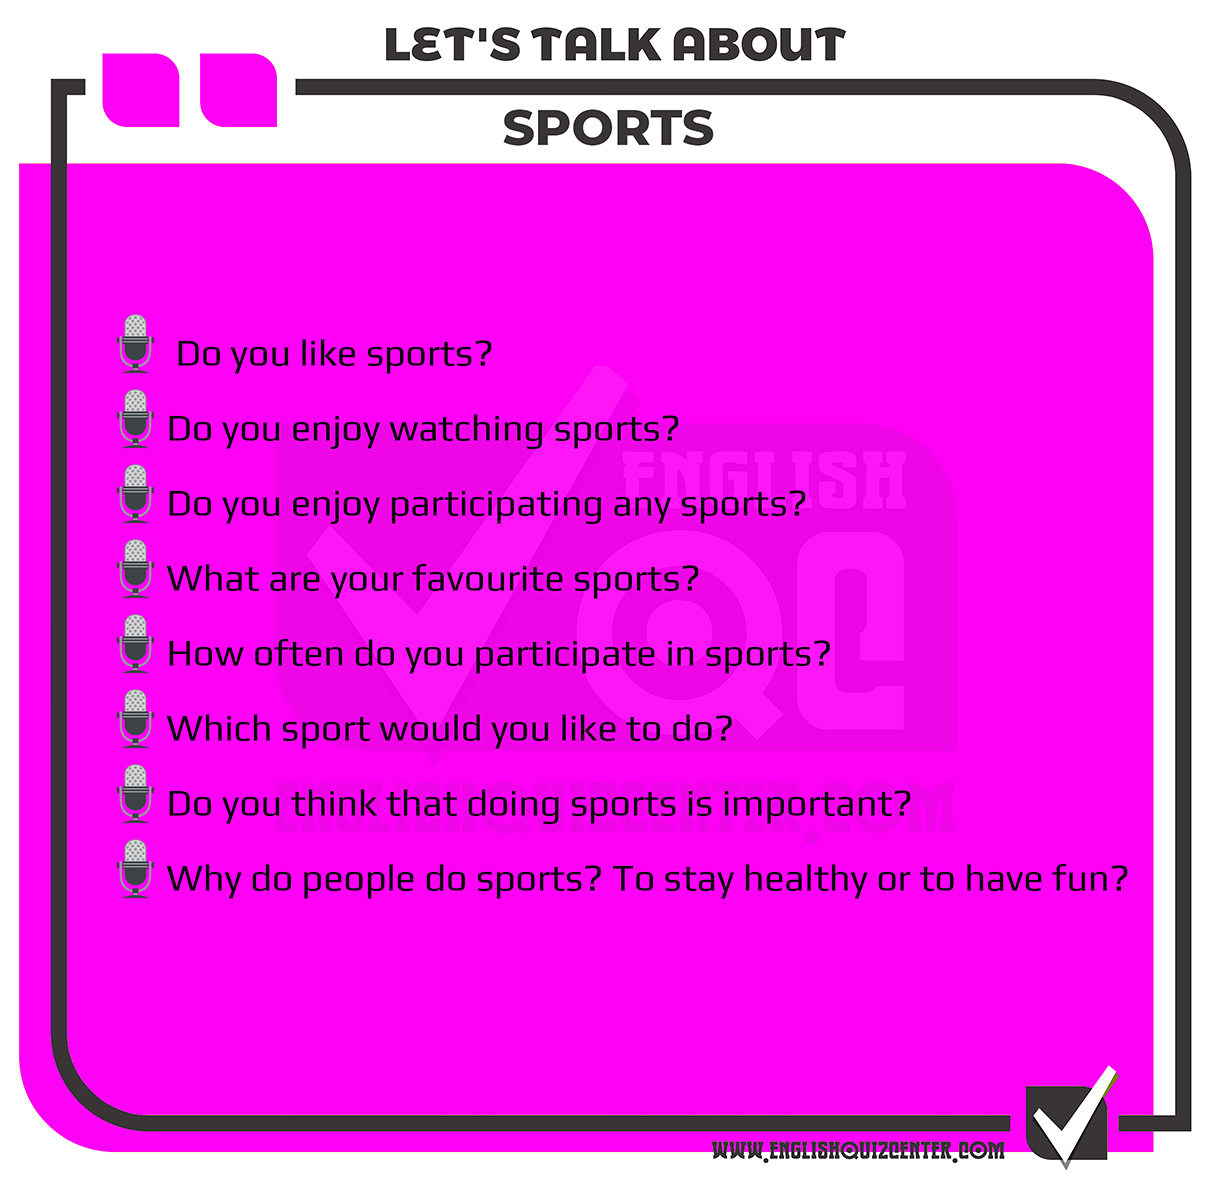 Talking about sports in English. Speaking exams, speaking tests and topics, speaking activities and speaking tests for English teachers.